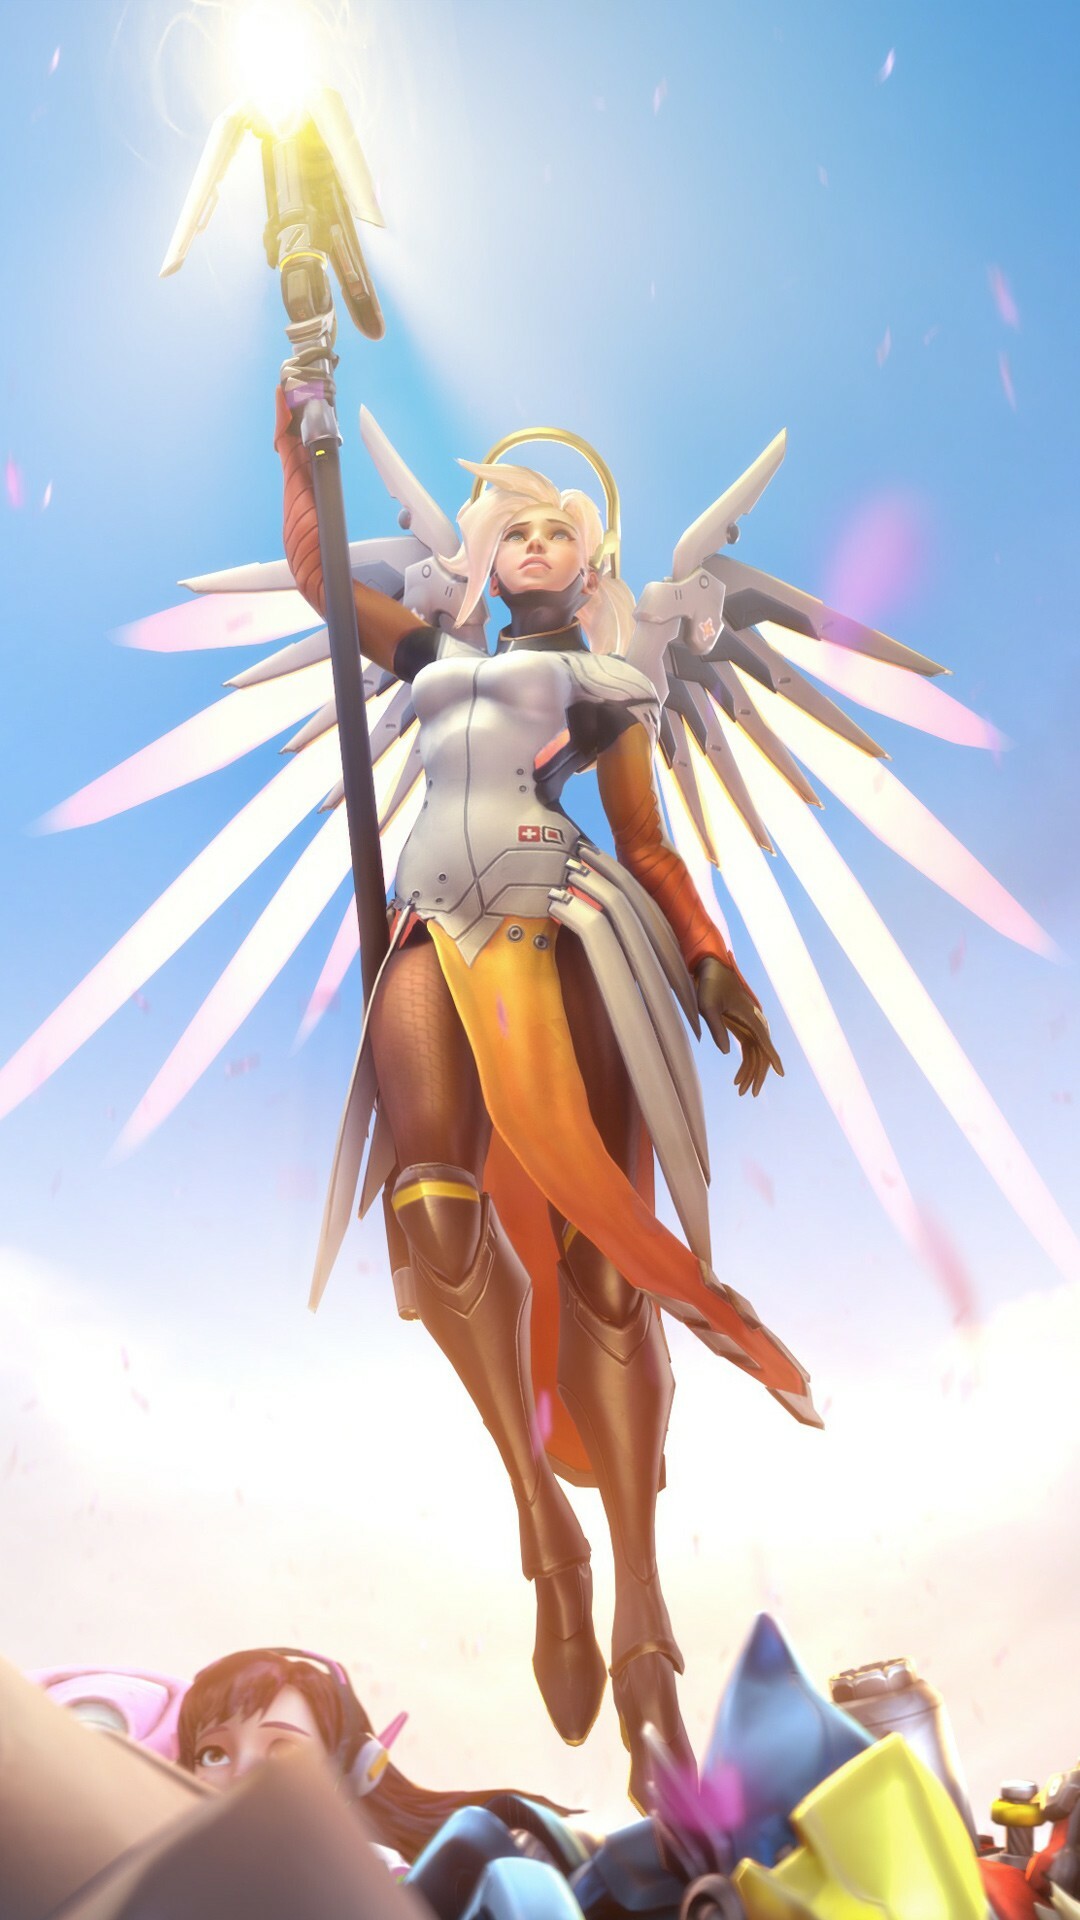 Overwatch: Mercy, A Support hero, Valkyrie Suit, Games. 1080x1920 Full HD Wallpaper.